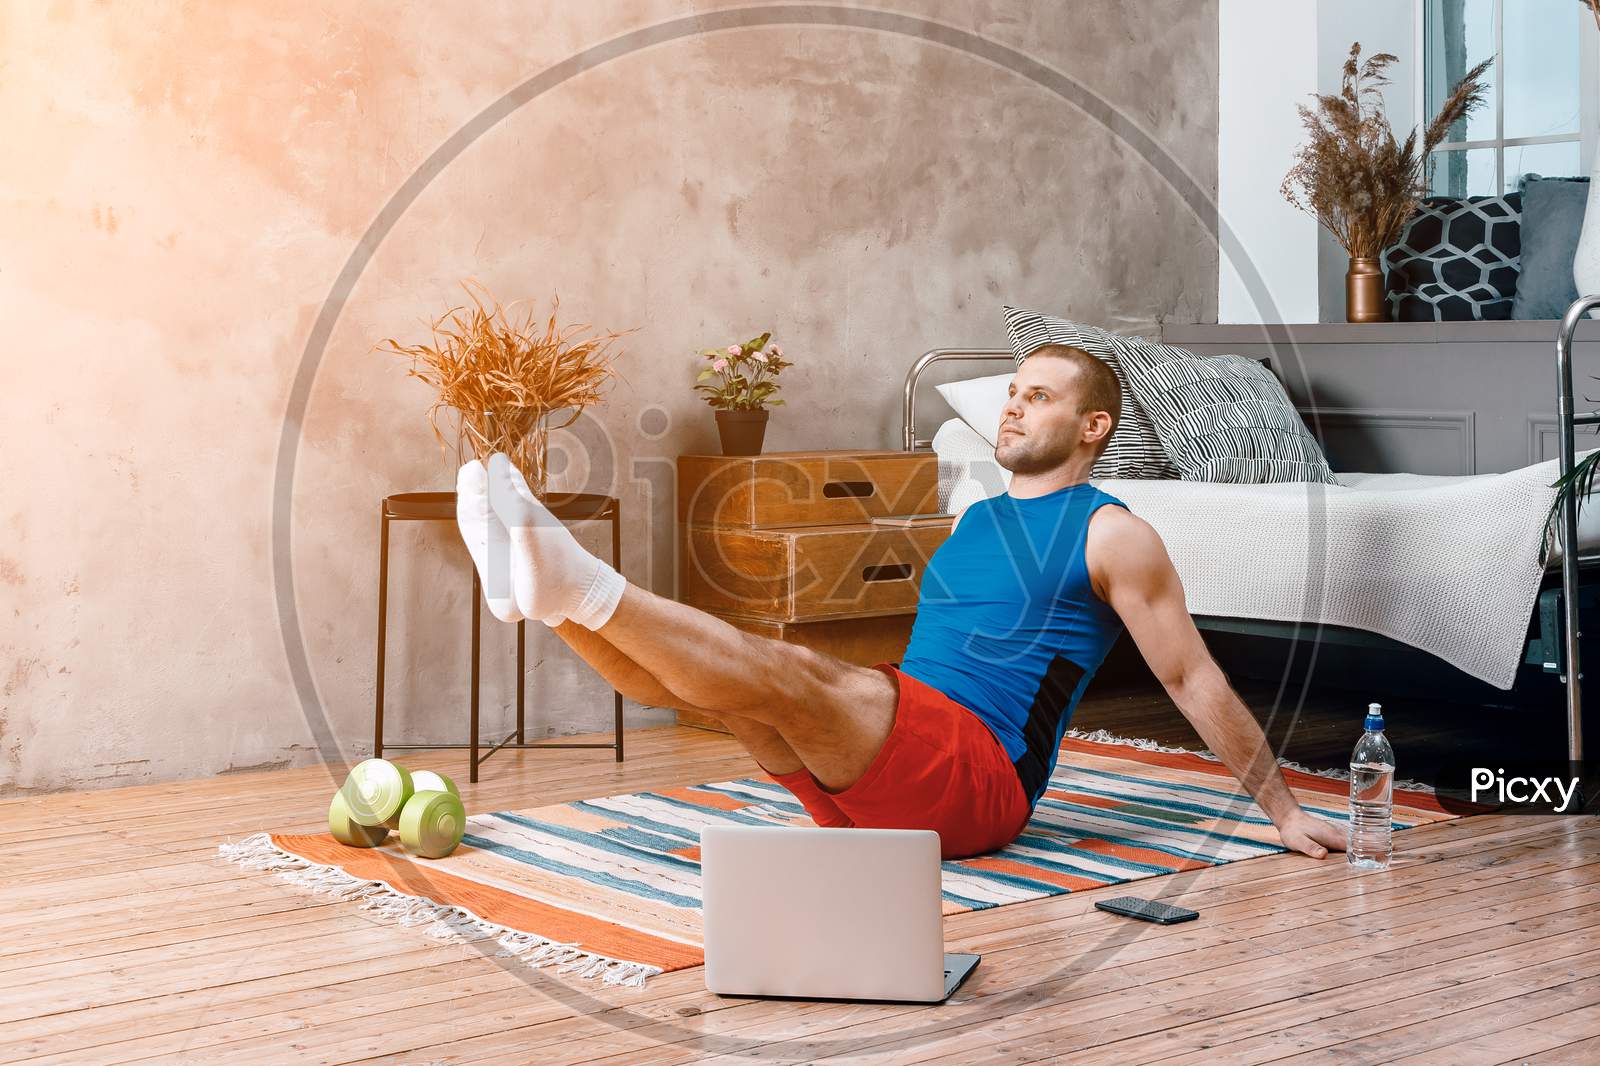 Young Man Goes In For Sports At Home, Training Online. The Athlete Makes The Press, Lifting His Legs Up,  Watches A Movie And  Social Networks  On Laptop